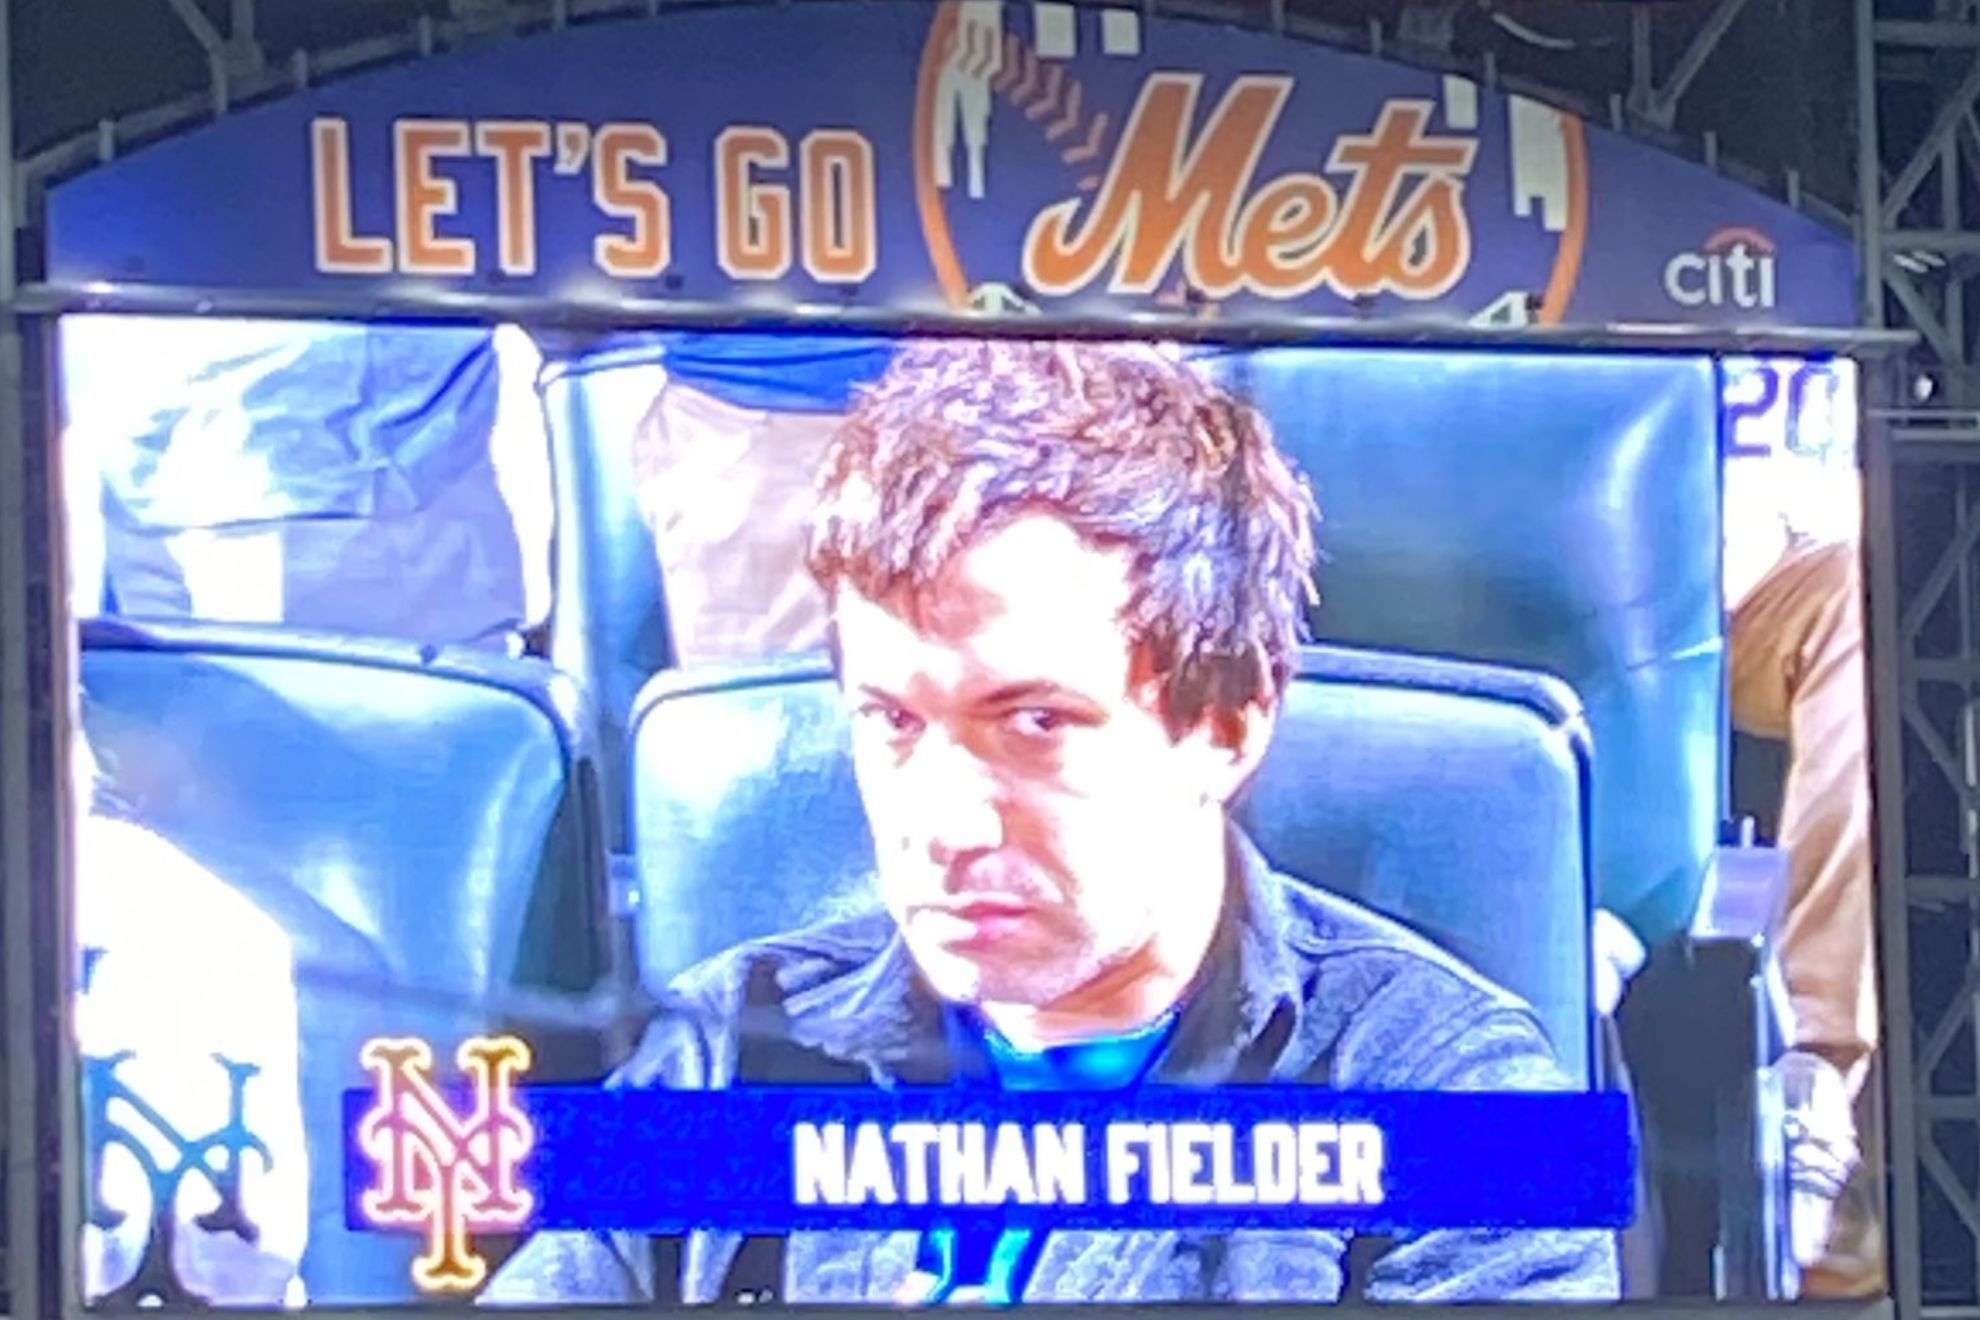 Nathan Fielder on the New York Mets jumbotron during Game 1 of Wild Card vs. San Diego Padres / @christianhoard